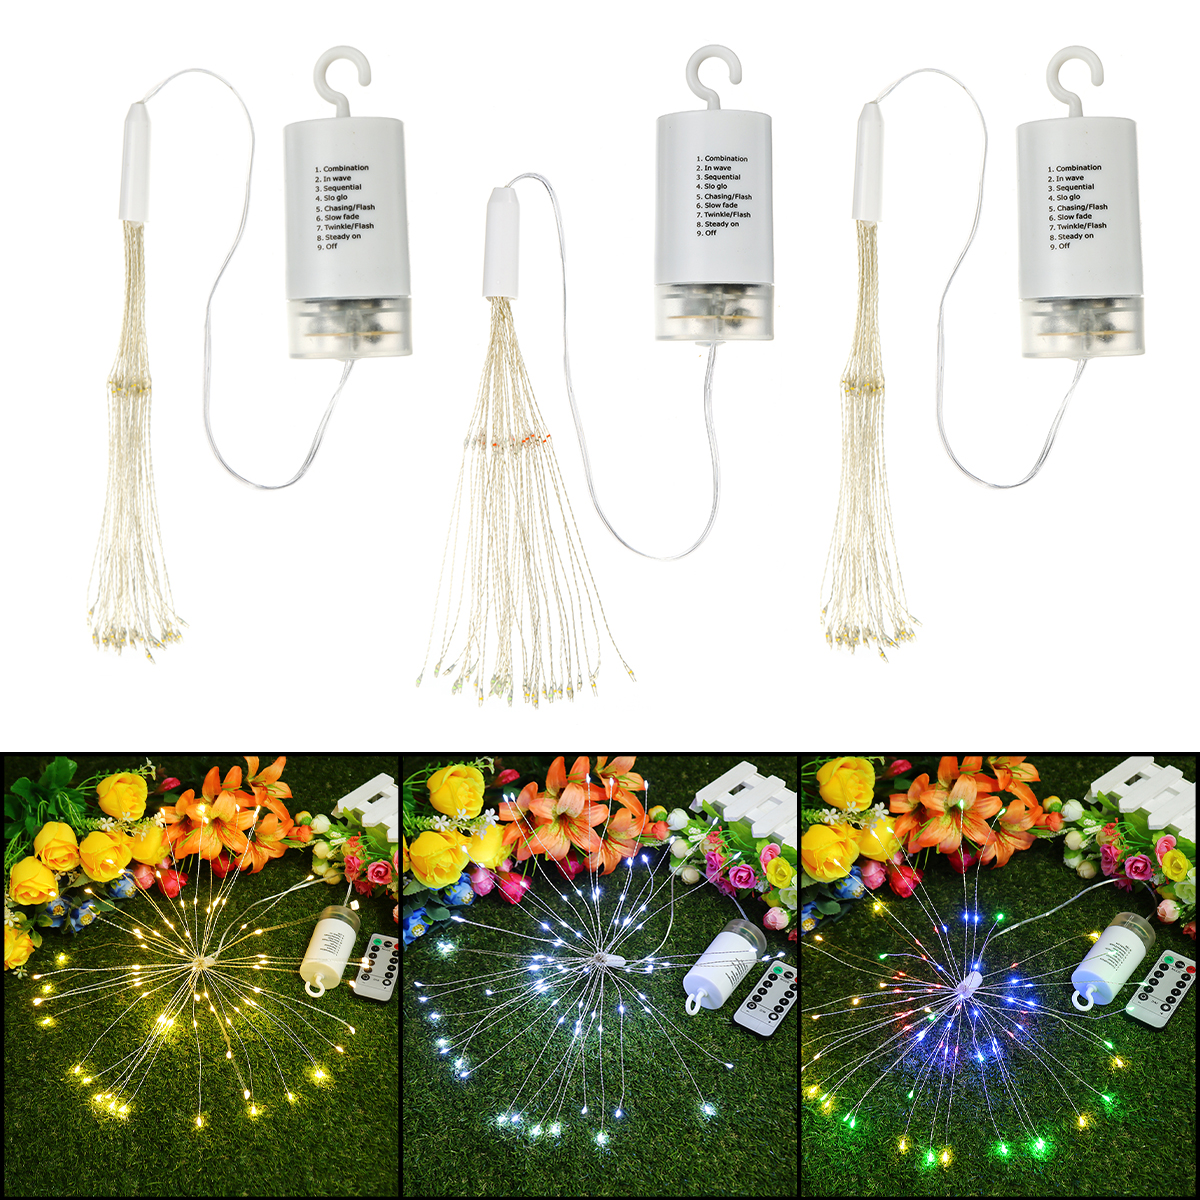 Hanging-LED-Firework-Fairy-String-Light-8Modes-Remote-Home-Party-Wedding-Decor-1691619-1